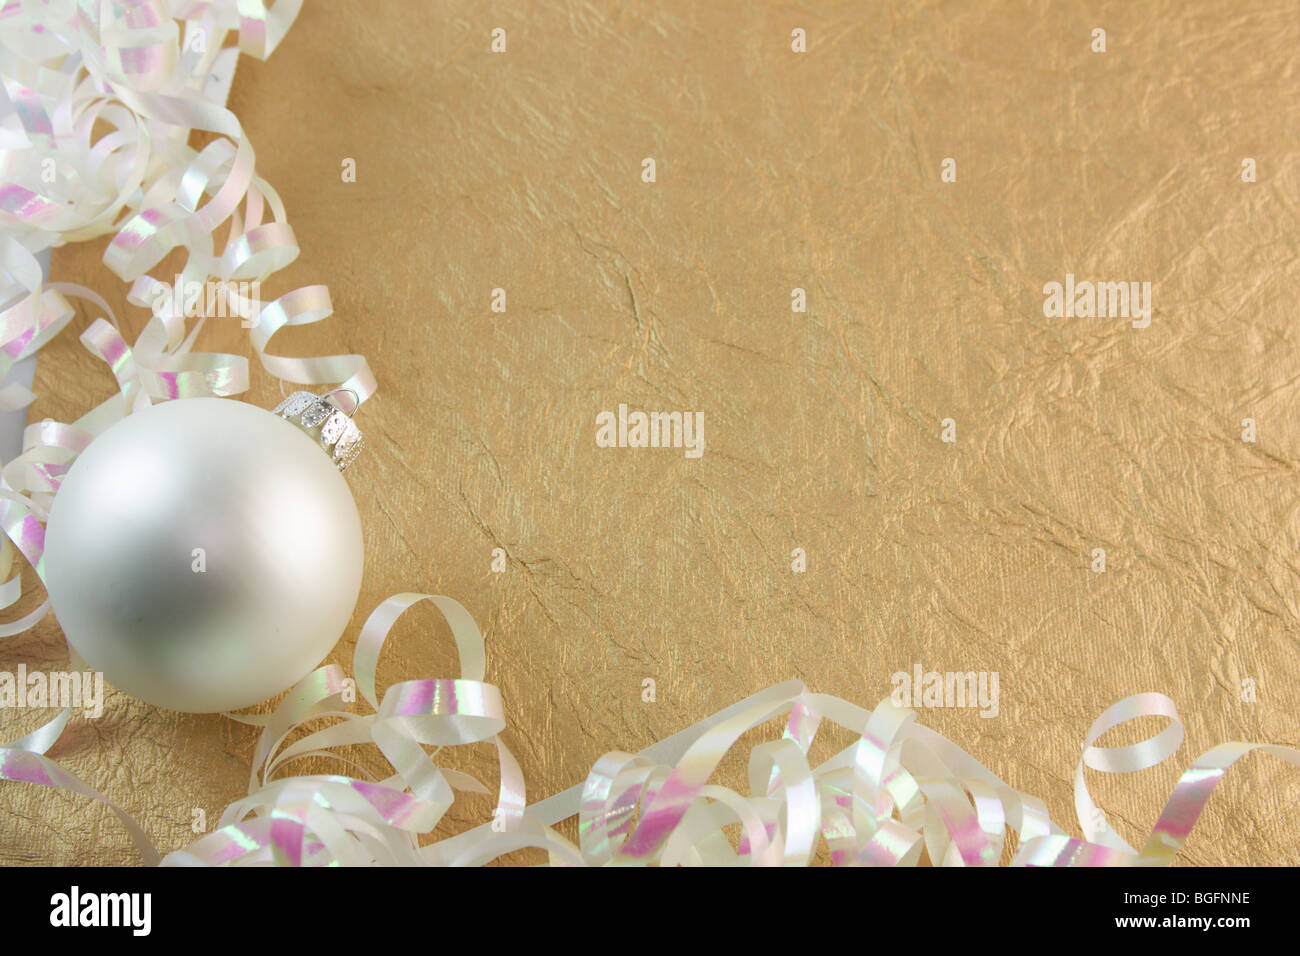 pearl white Christmas ornament with curly metallic ribbon on a textured gold background Stock Photo